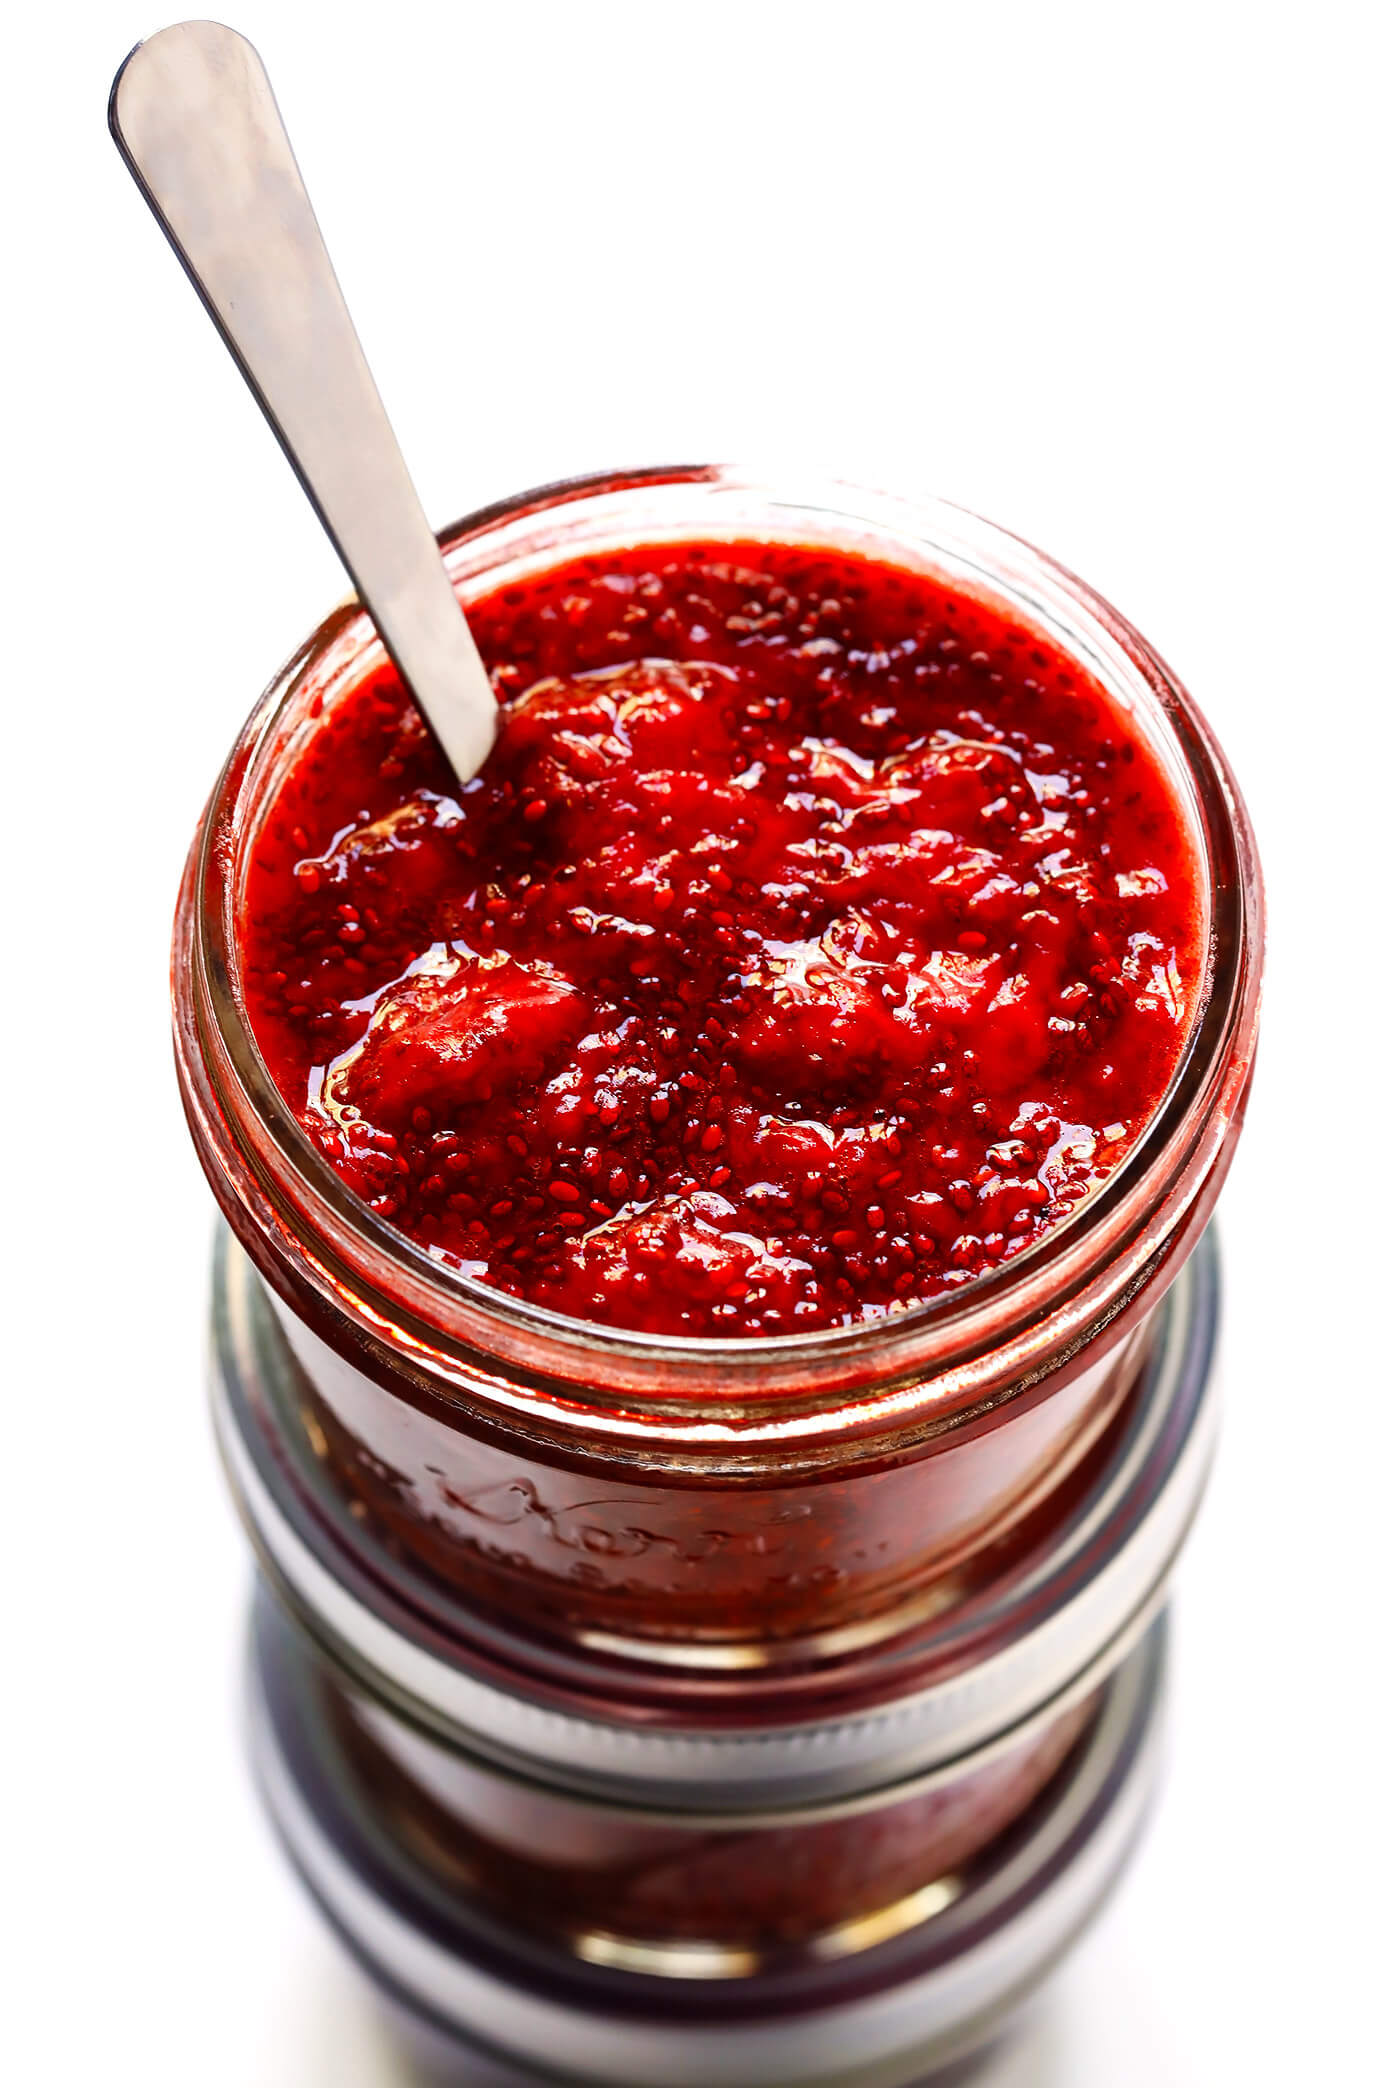 10-Minute Chia Seed Jam | Gimme Some Oven